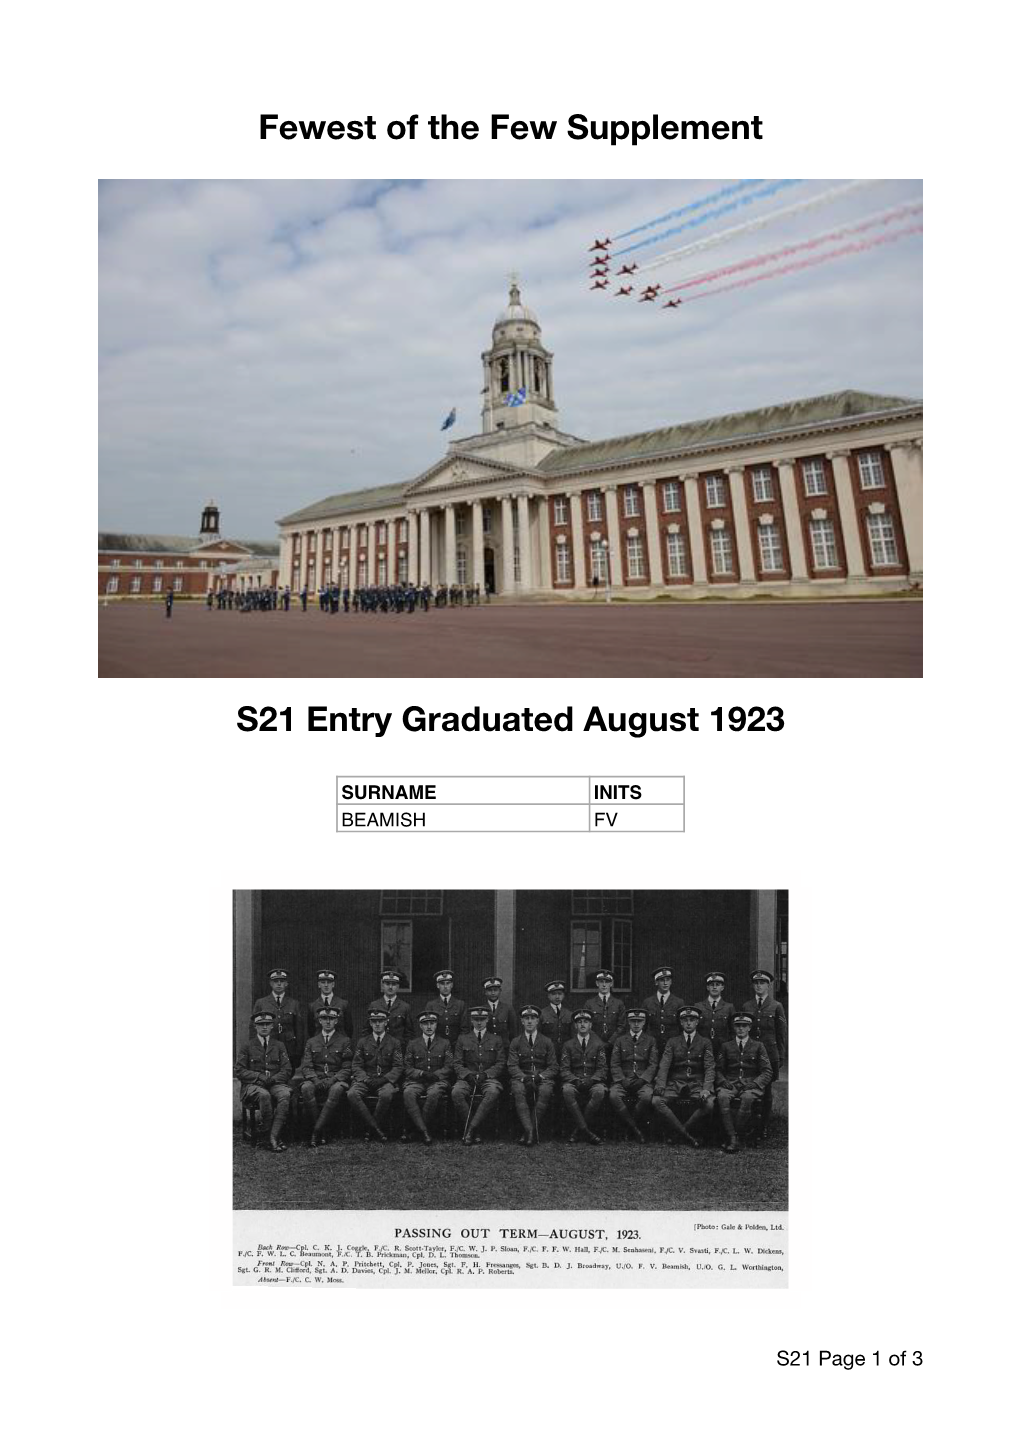 S21 Entry Graduated August 1923